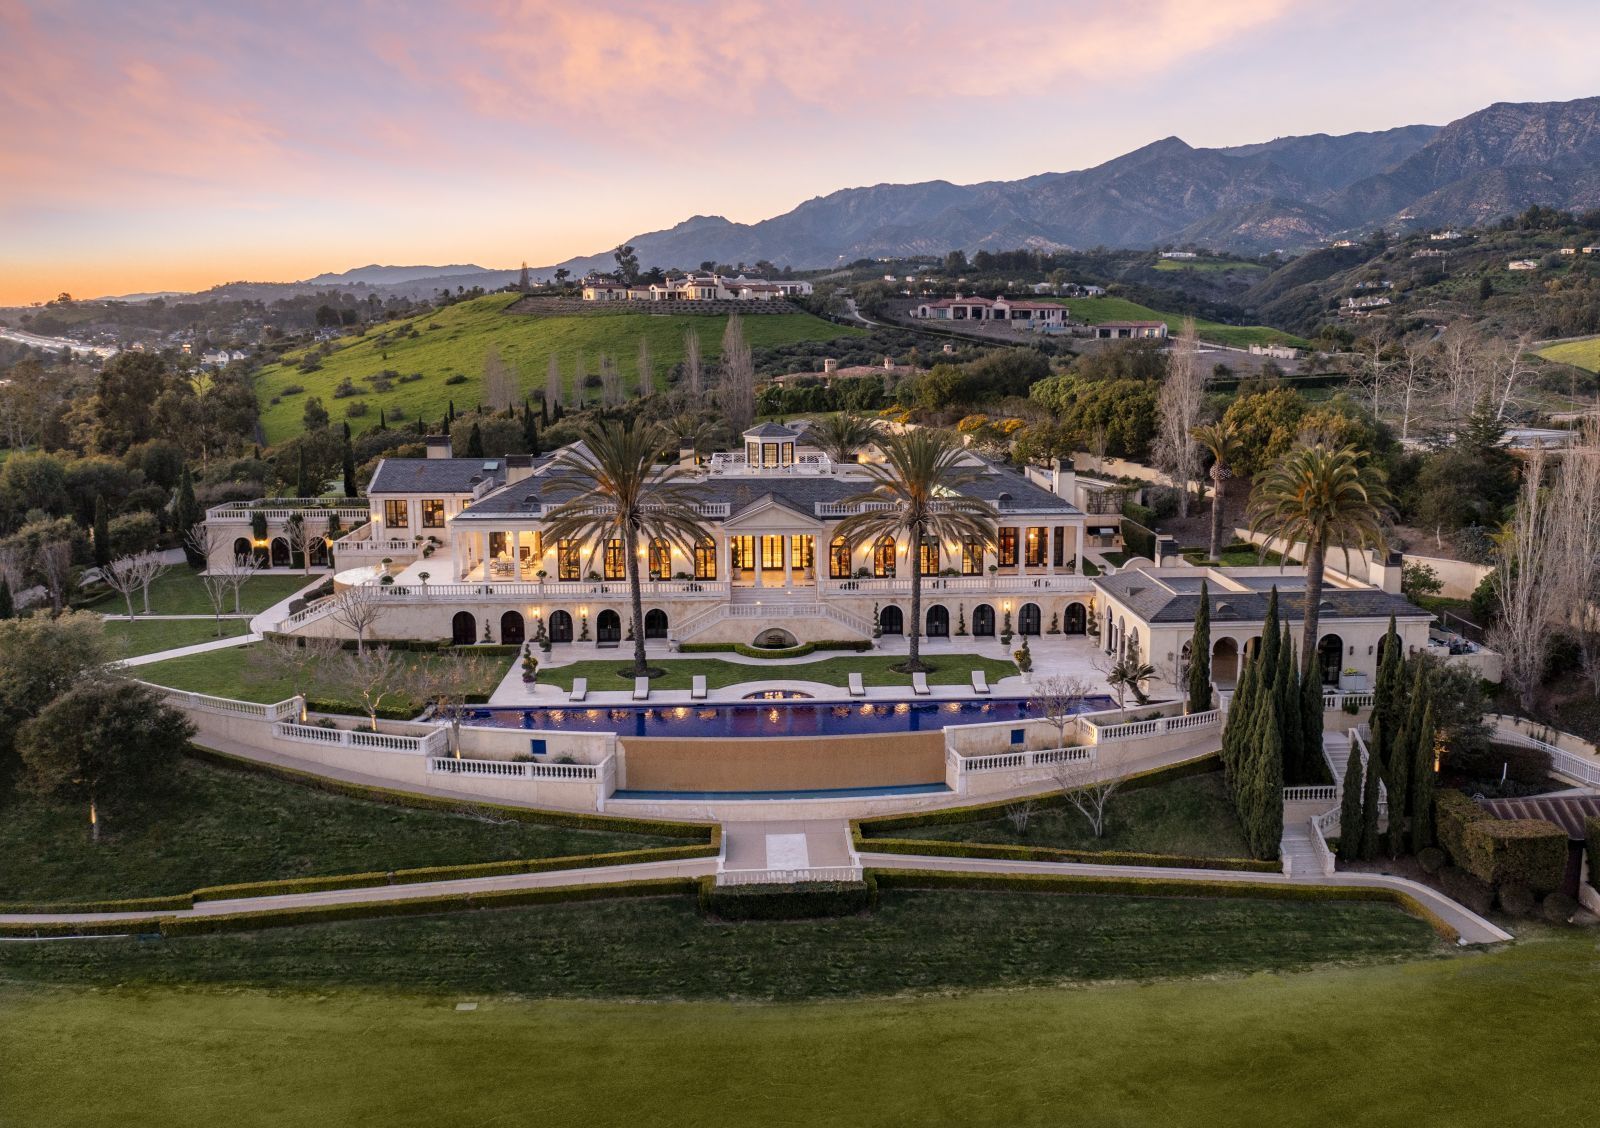 A massive Carpinteria CA estate, with mountains in the background, a large pool terraces and a polo field in the foreground.